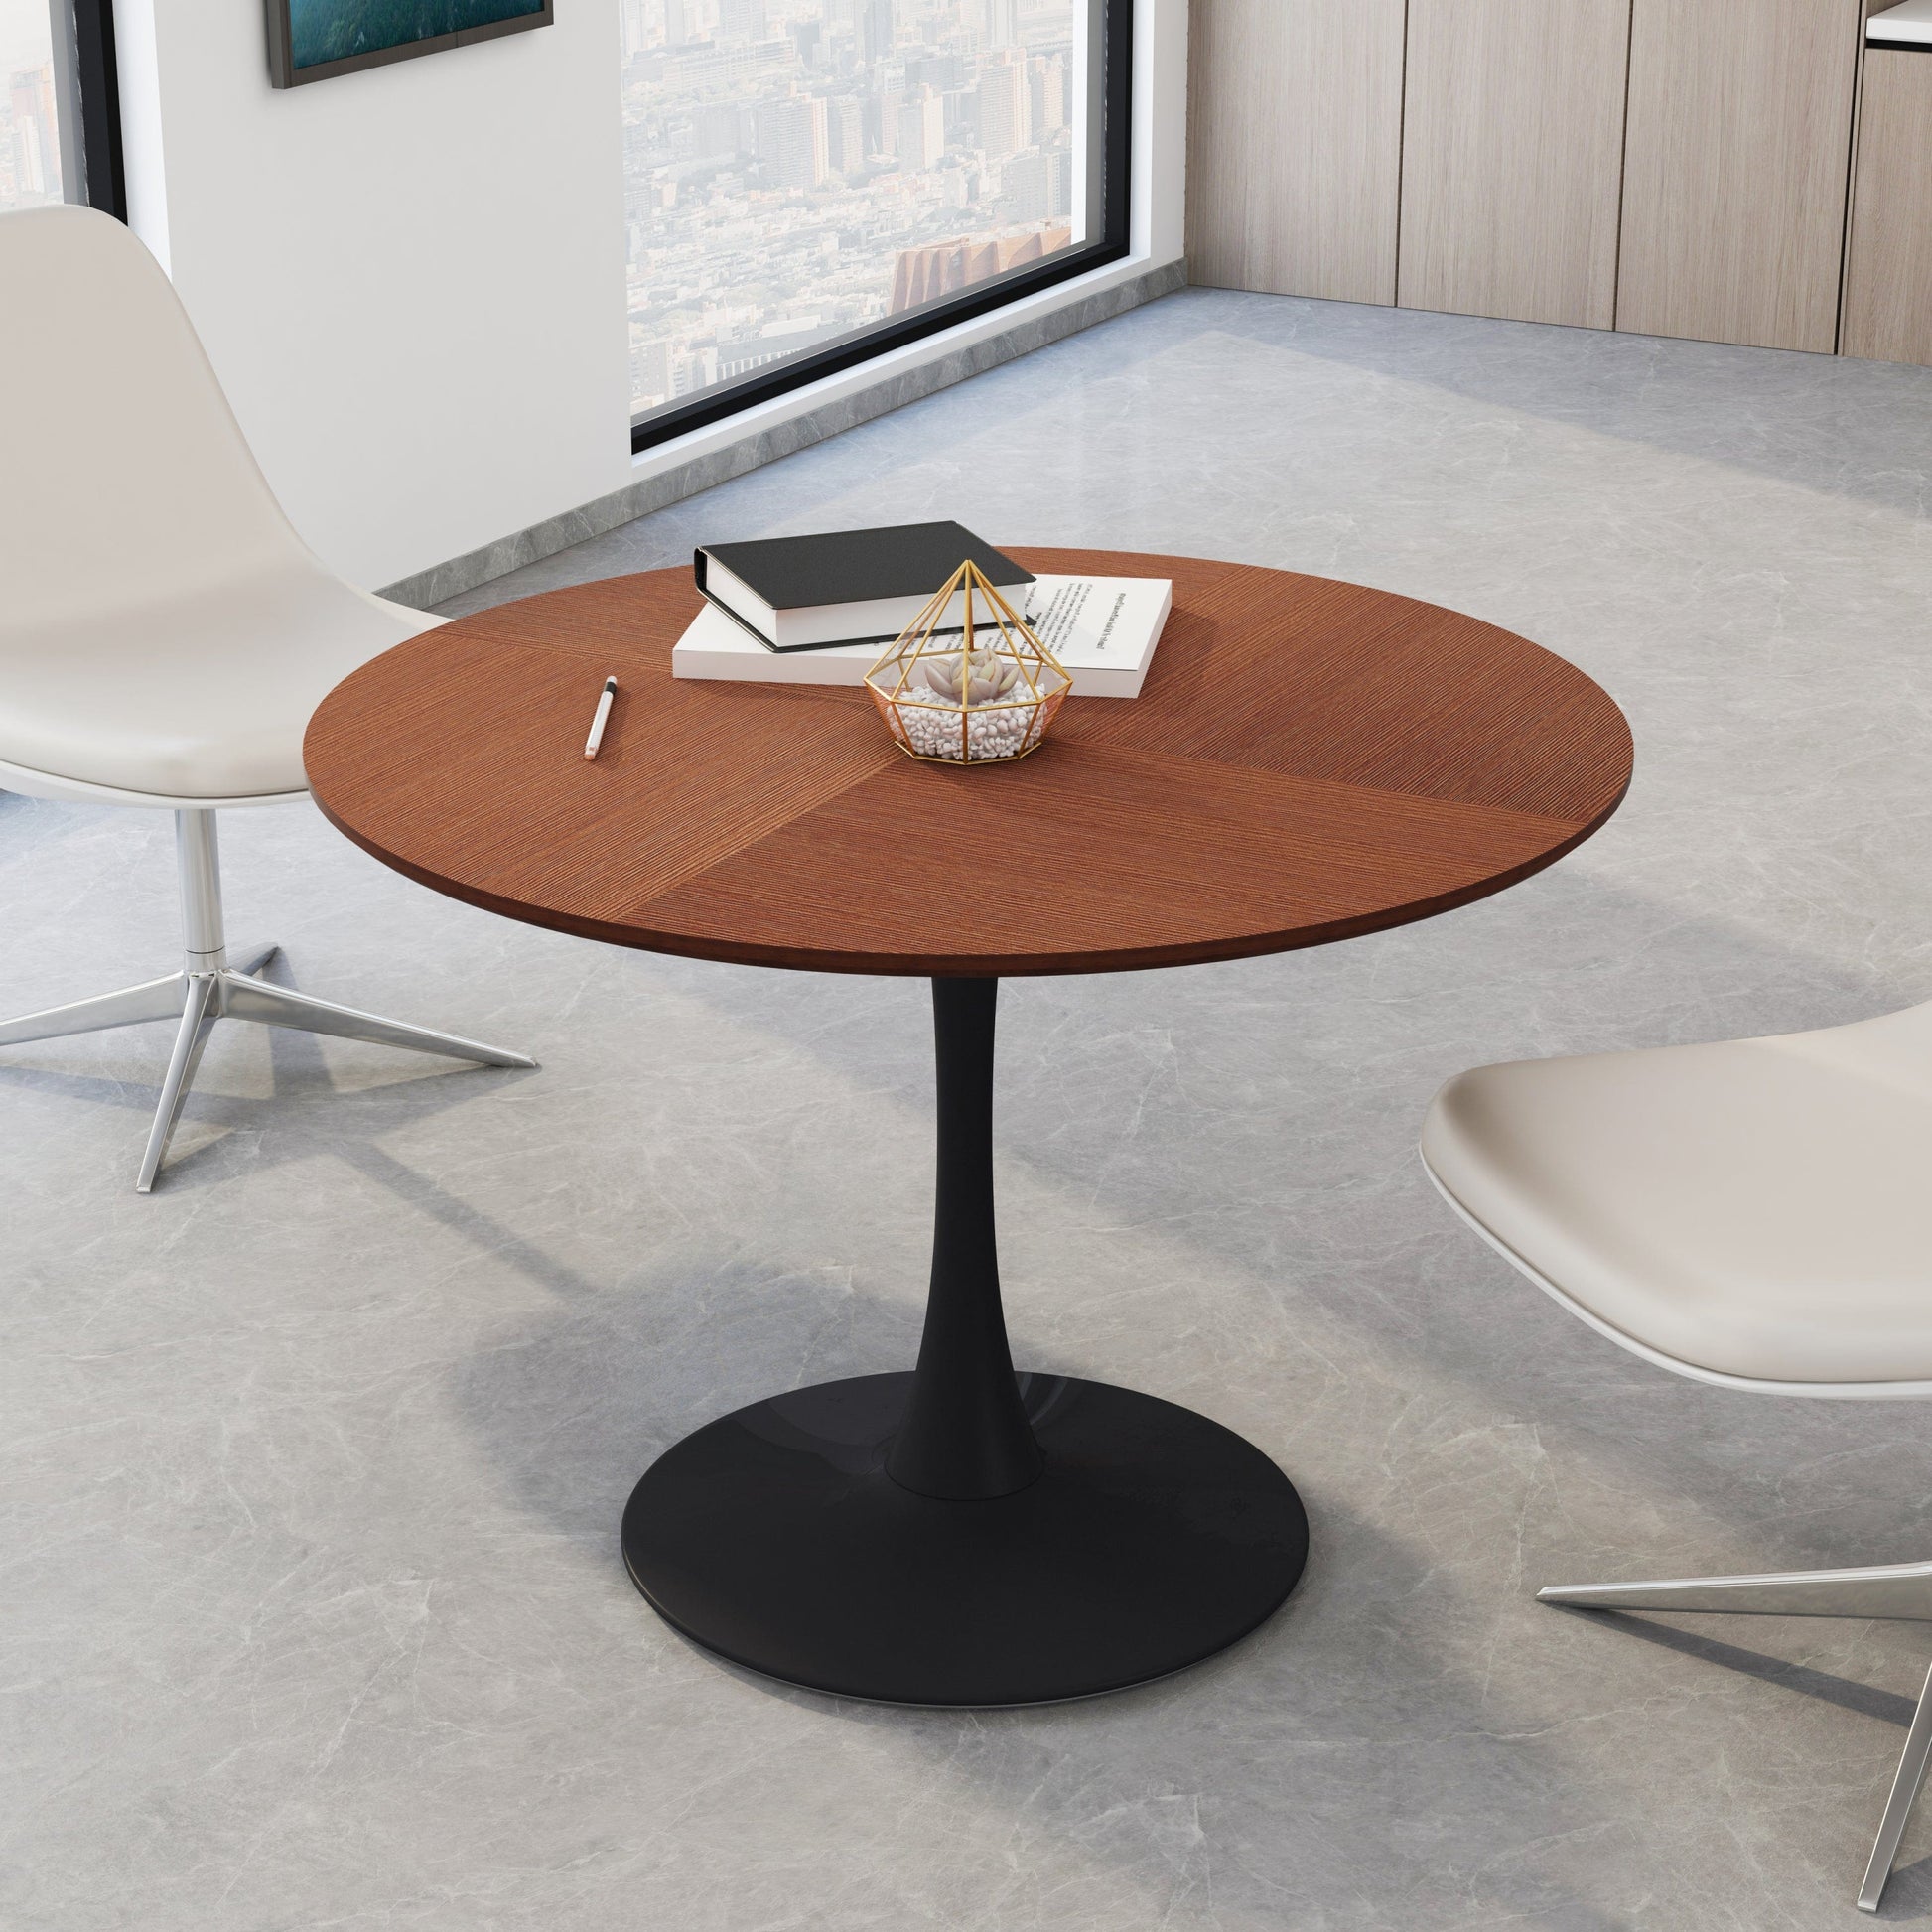 1st Choice Furniture Direct Dining Table 1st Choice 42" Round Dining Table Modern Design with Printed Oak Grain